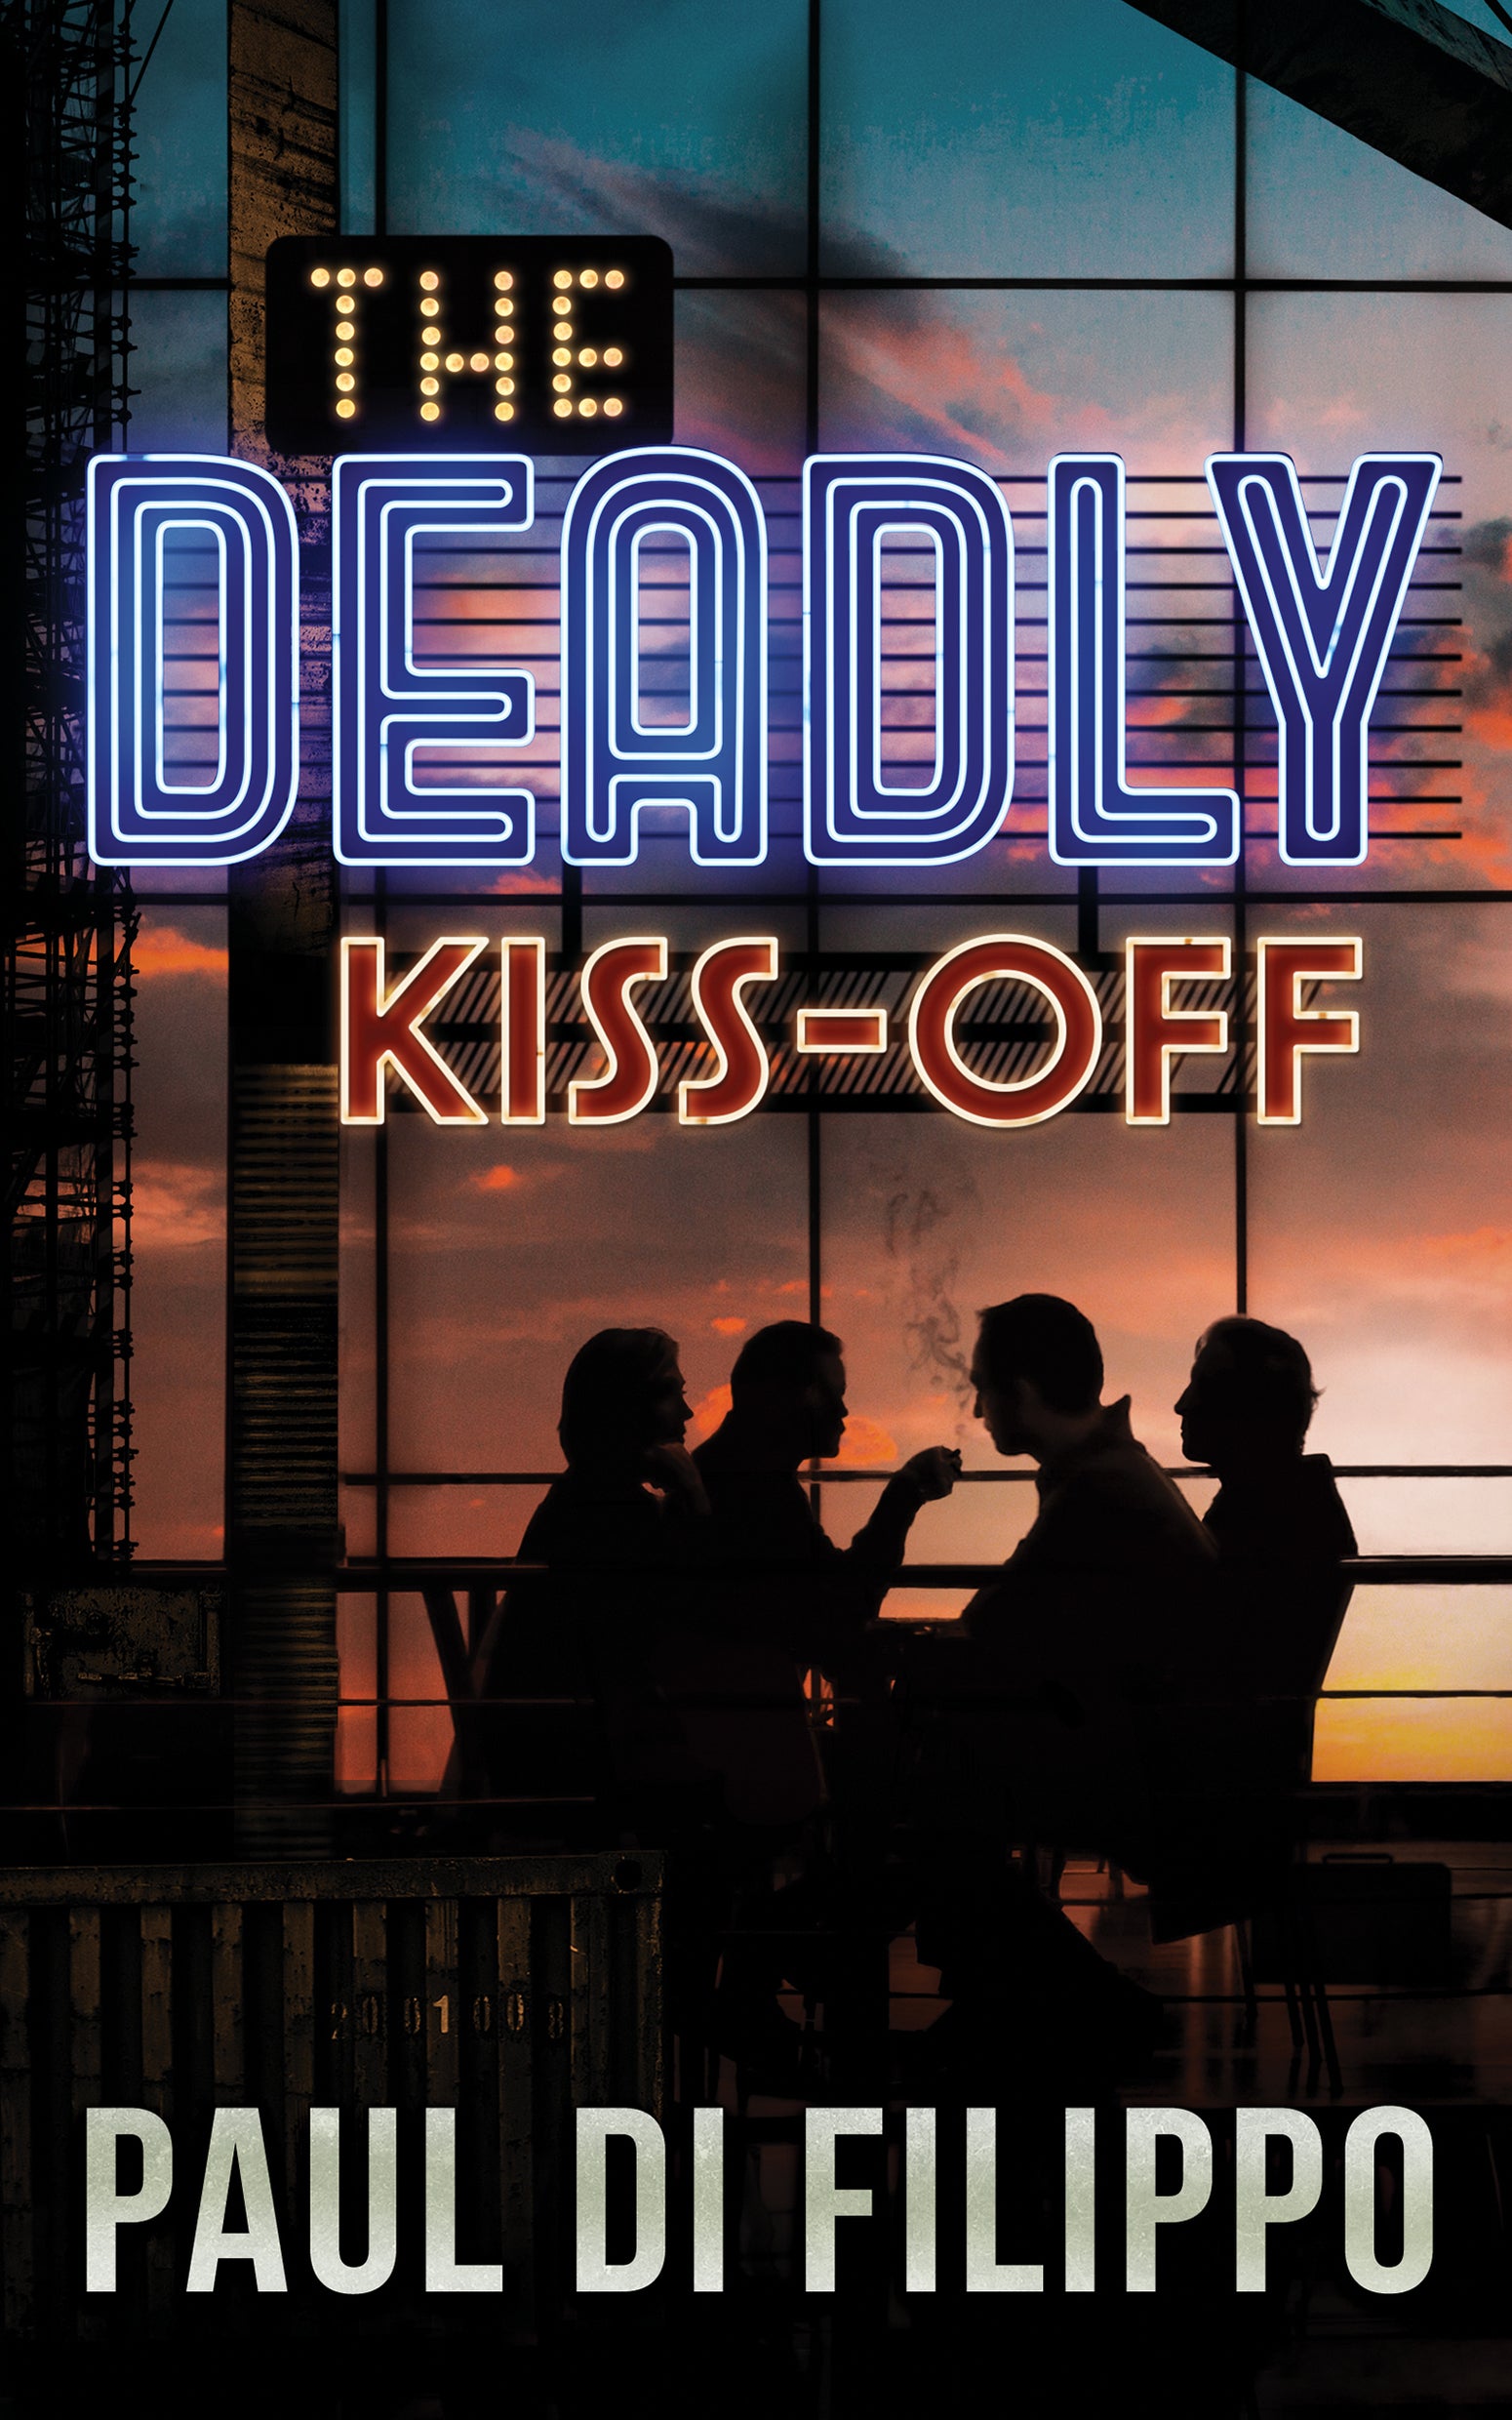 The Deadly Kiss-Off